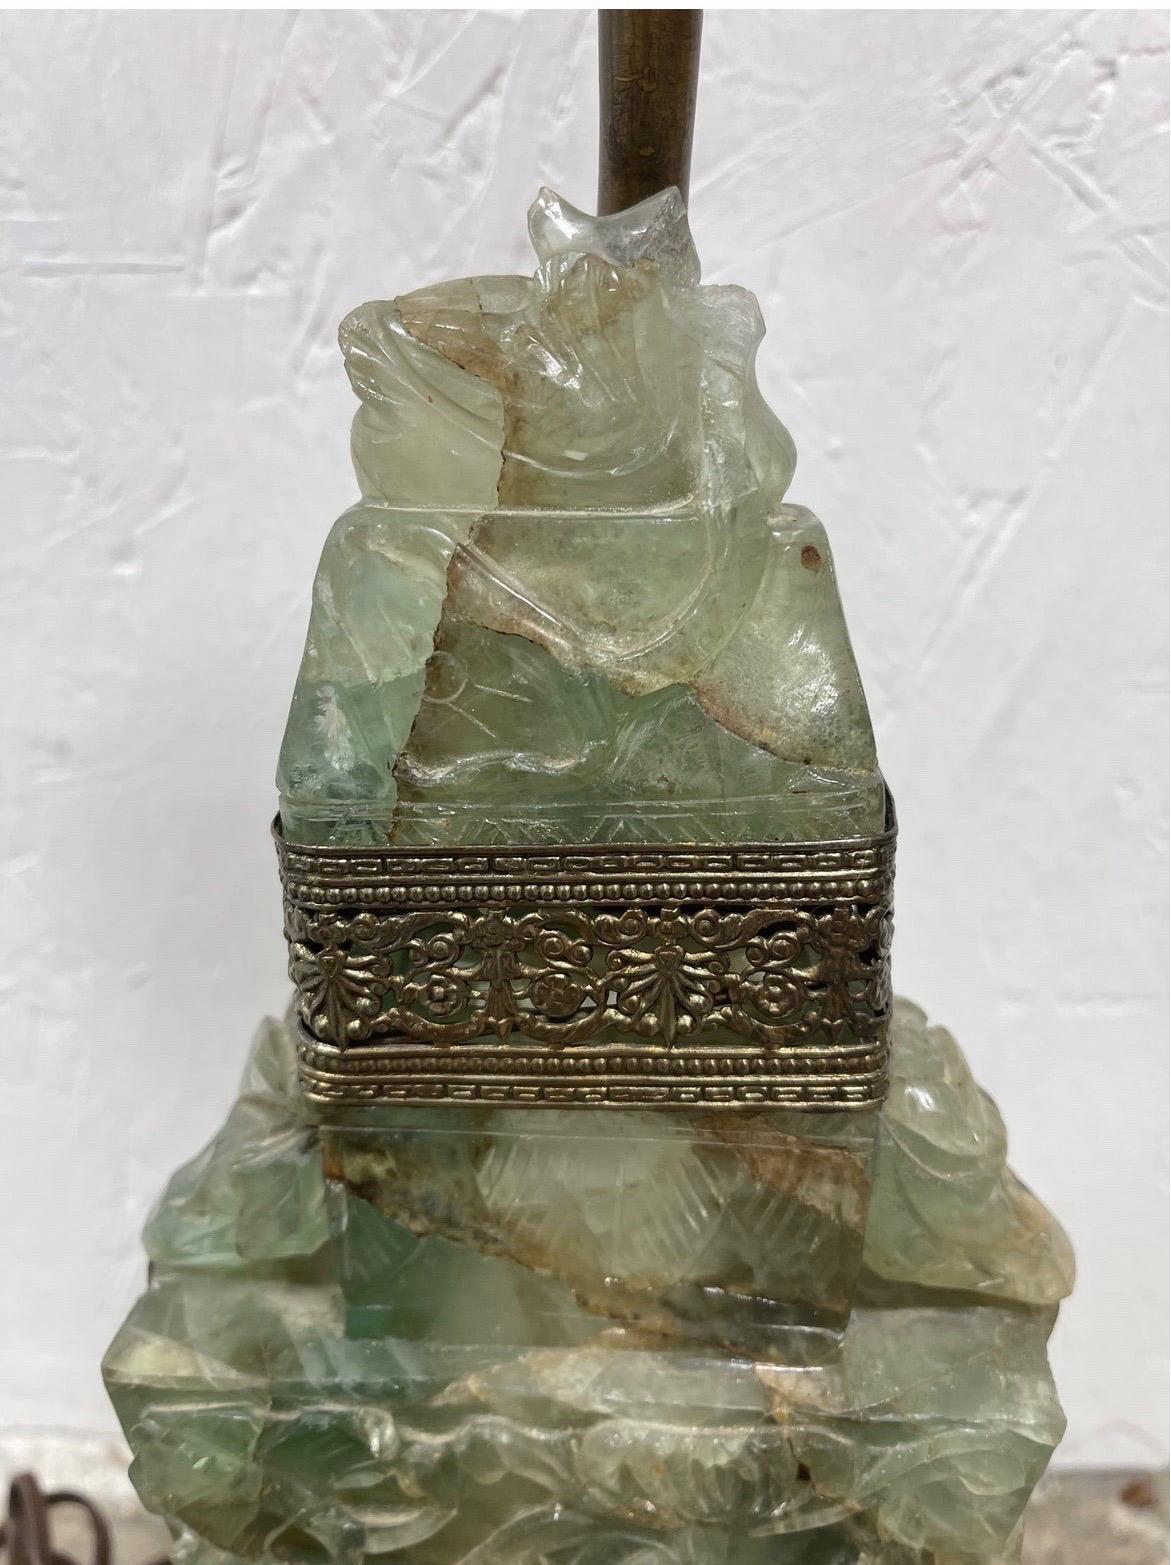 Antique Chinese Art Deco era carved jade table lamp. Featuring a carved scholar stone style mount with brass separation between the main body and lid. 